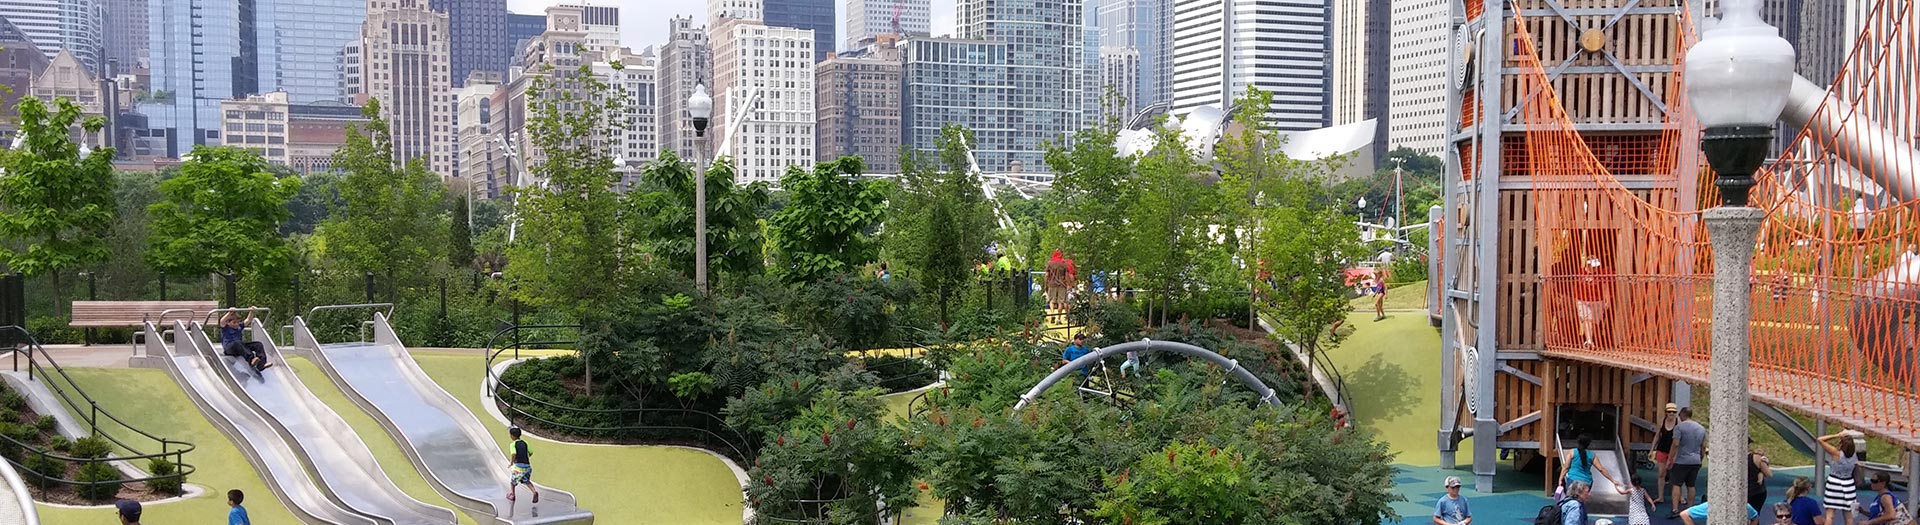 Maggie Daley Park play structure